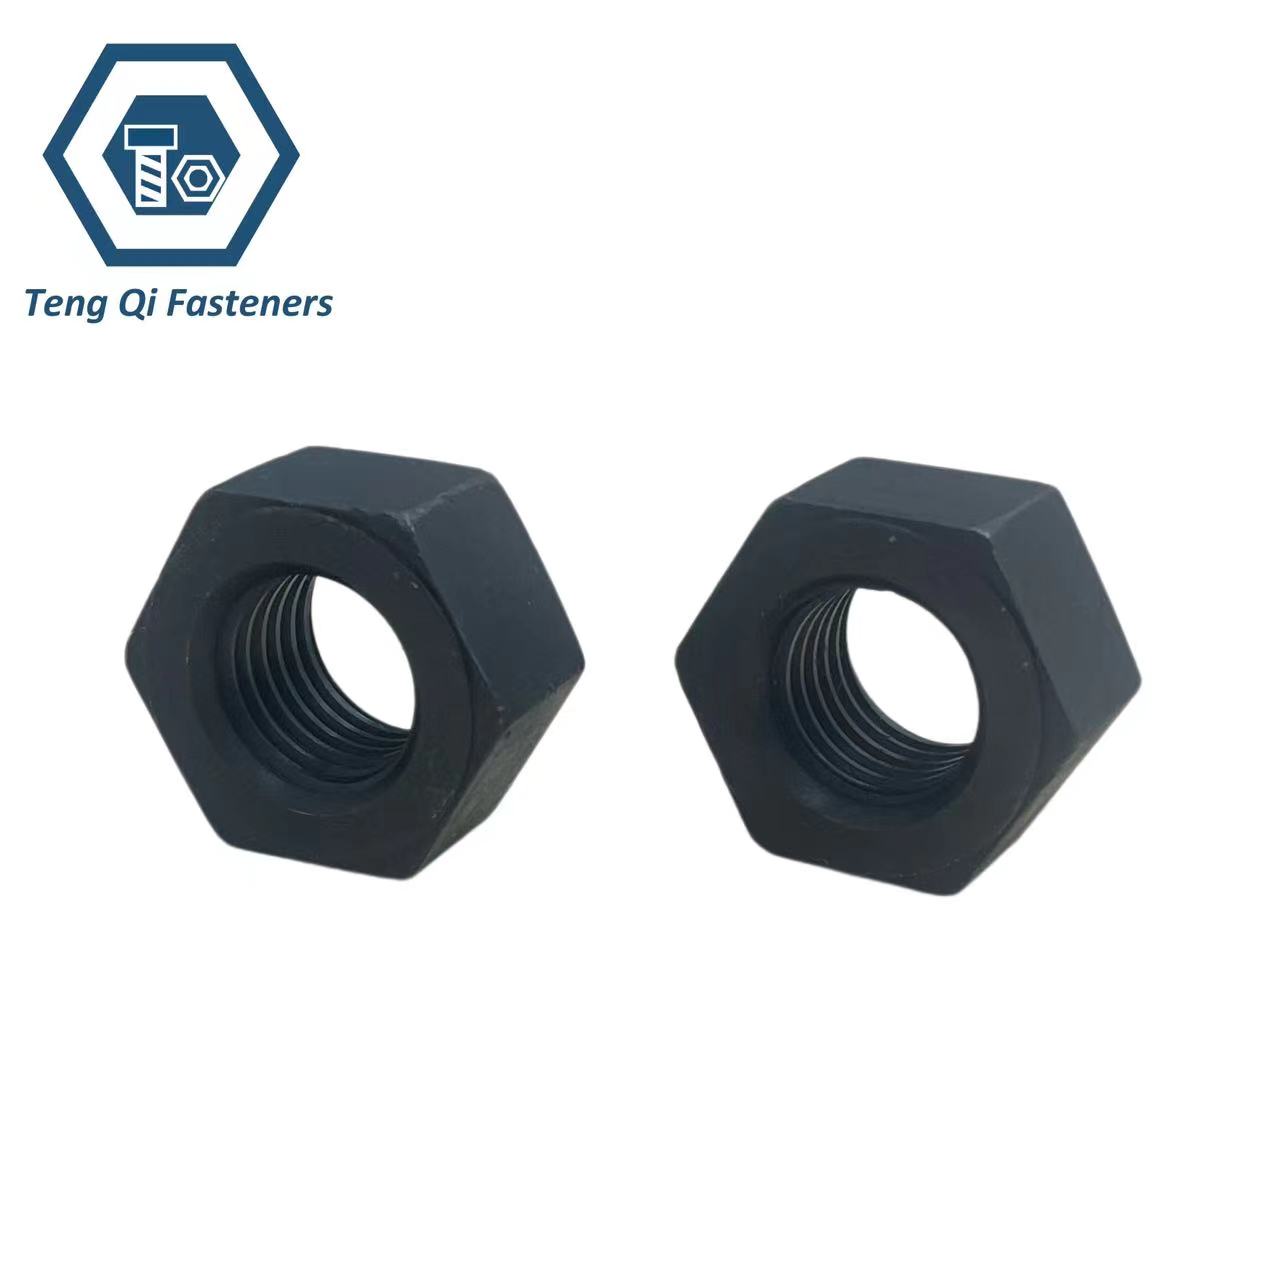 A563 Heavy Hex Nuts Manufacturers, Suppliers and Factory in China